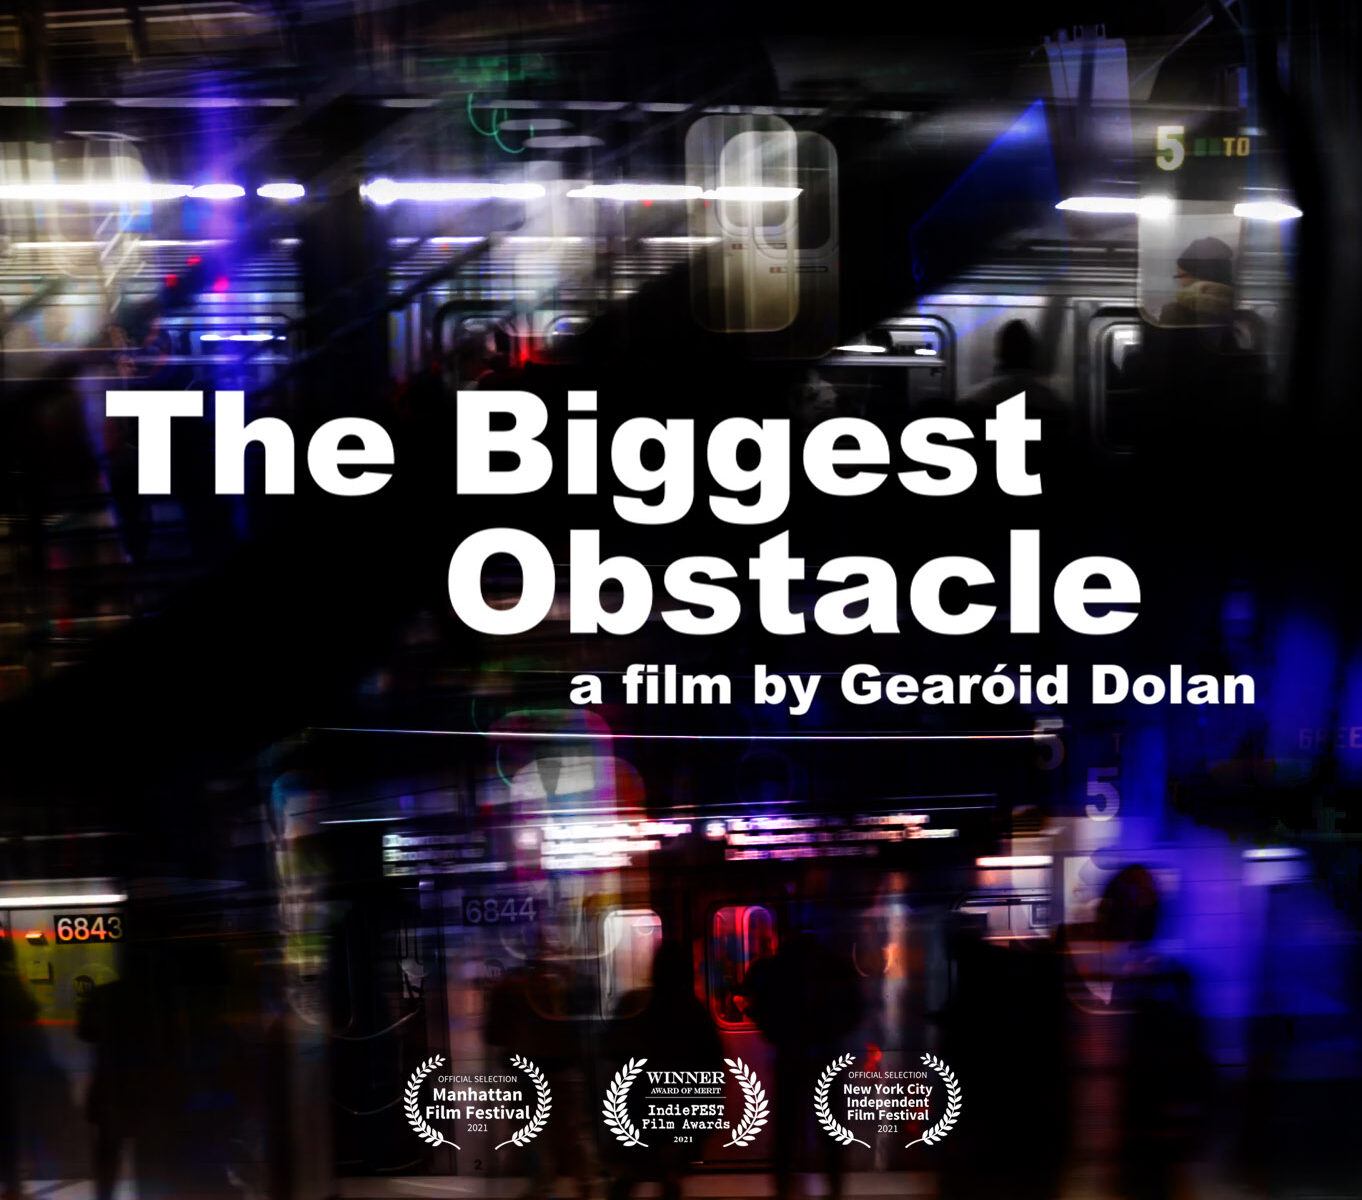 Promotional image and text. Background blends images of subway cars, stairs and people waiting on a platform. Centered and bold text reads The Biggest Obstacle, a film by Gearoid Dolan. Below the title text are 3 film festival Laurens from Manhattan Film Festival, New York City Independent Film Festival and the Indie Fest Film Awards 2021